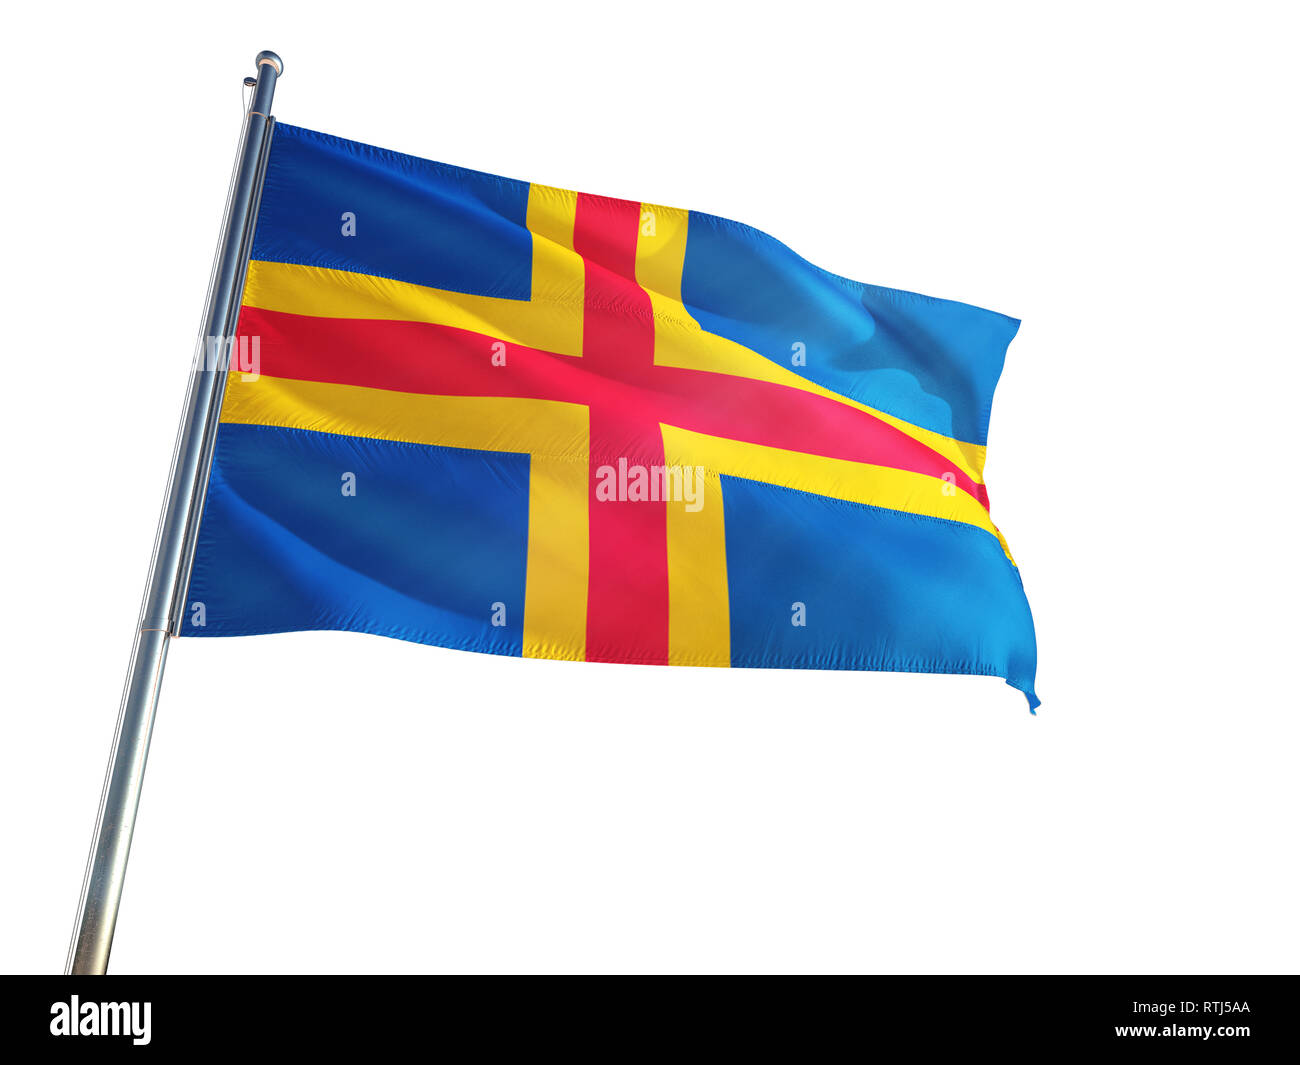 Aland Islands National Flag waving in the wind, isolated white background. High Definition Stock Photo